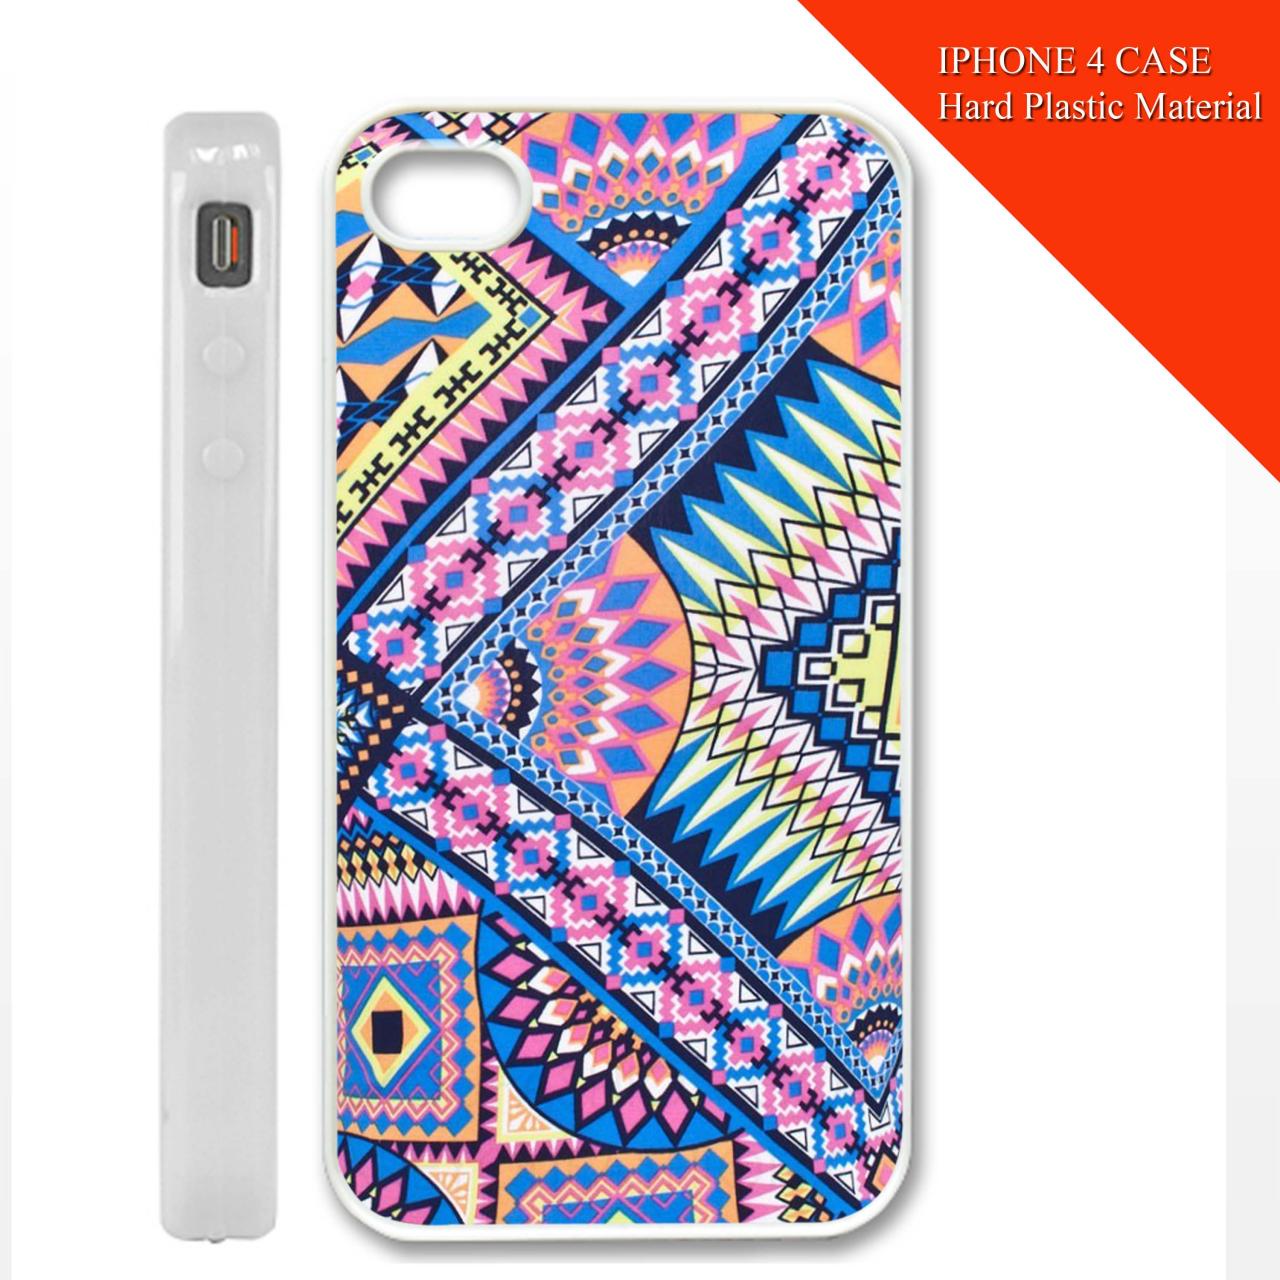 Astec 10 For Iphone 4/4s,5,samsung Galaxy S2 I9100,s4 I9500,galaxy S3 I9300 Case